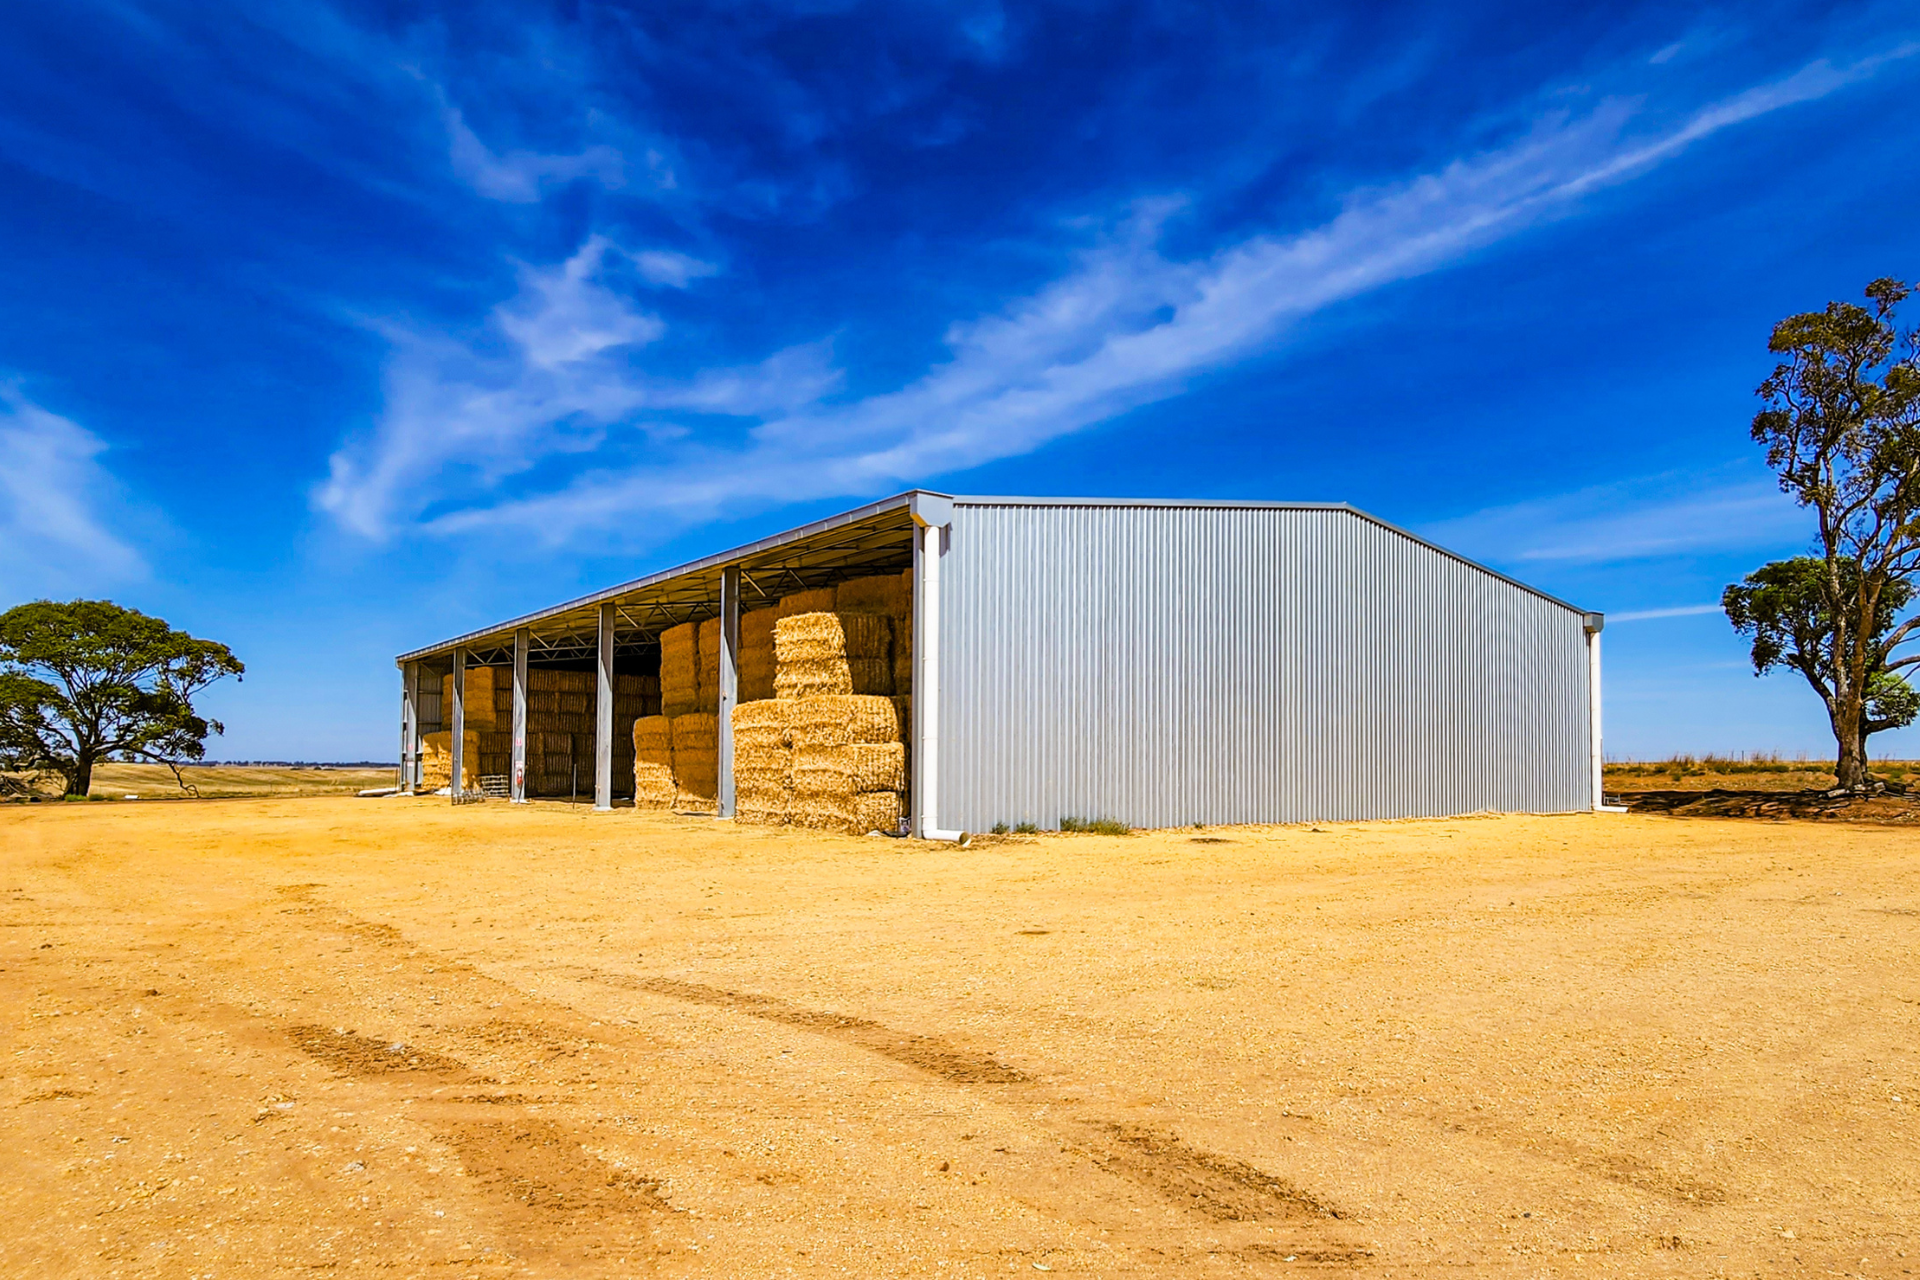 42.5m x 24m x 6m hay shed at Laen East VIC